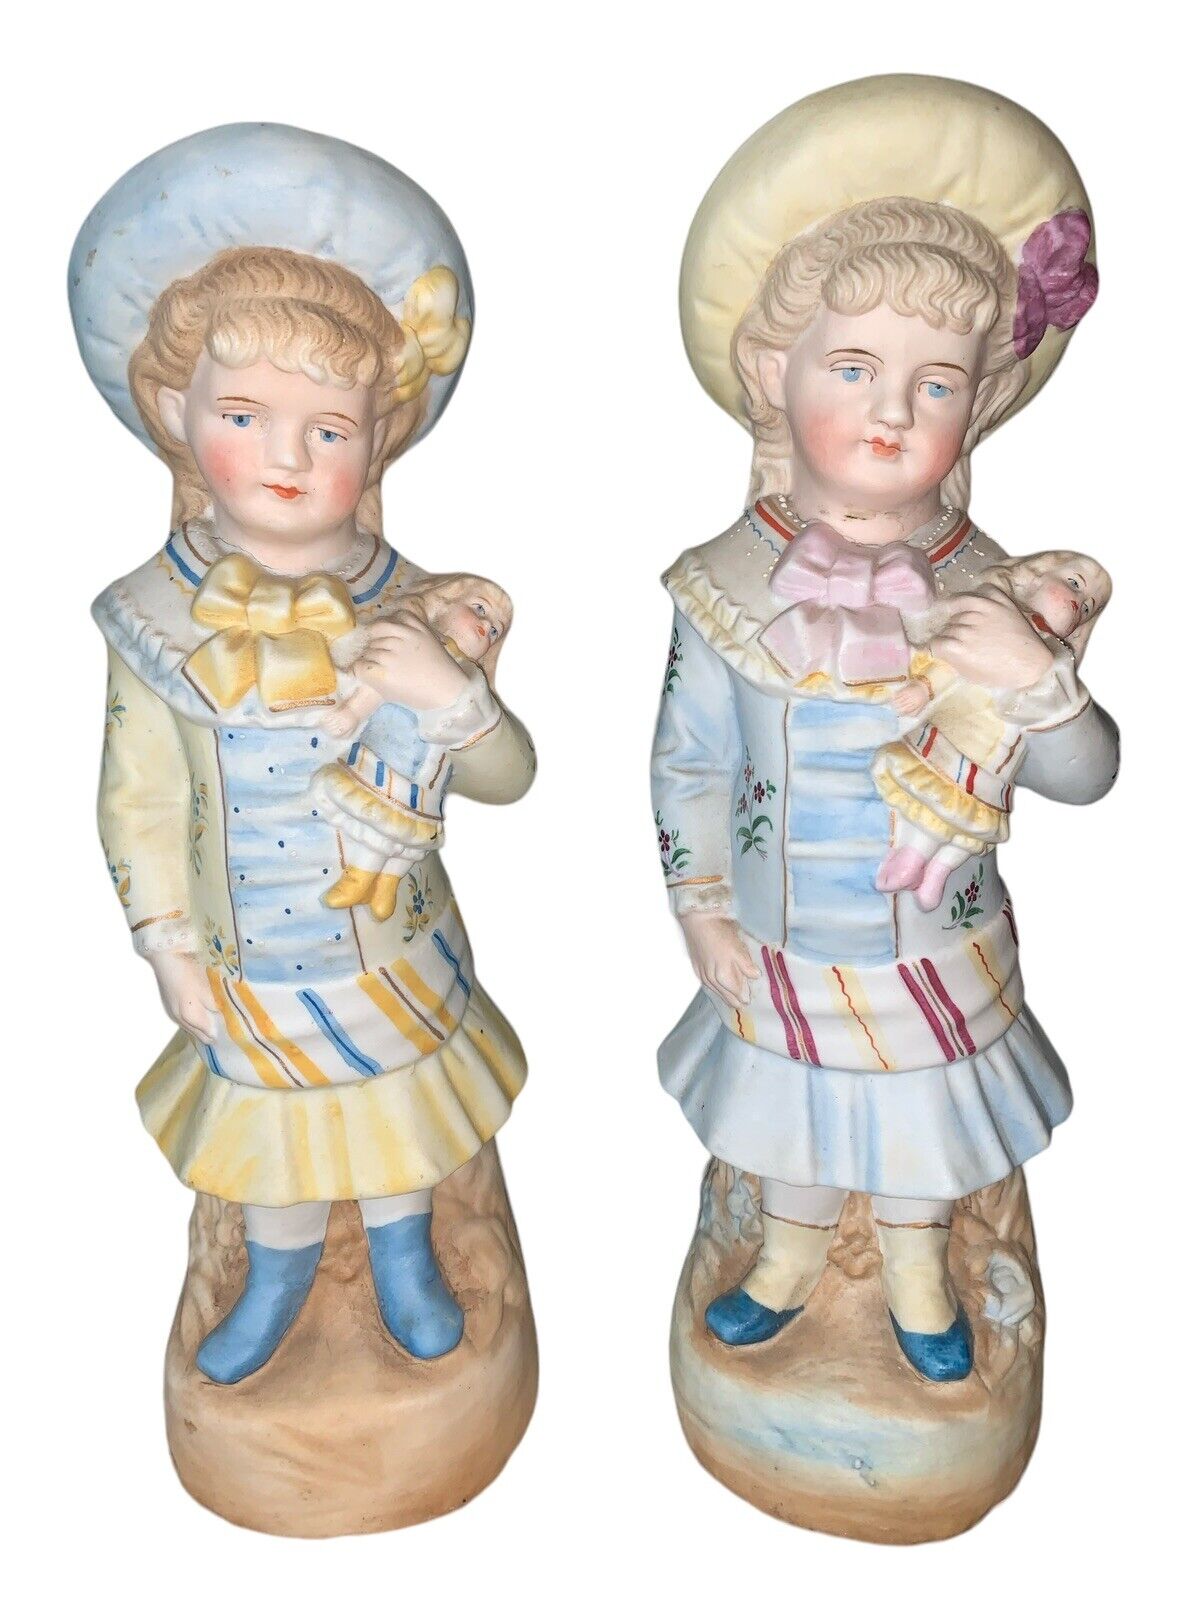 Antique German Hand Painted Bisque Porcelain Figurines Girls Holding Doll READ